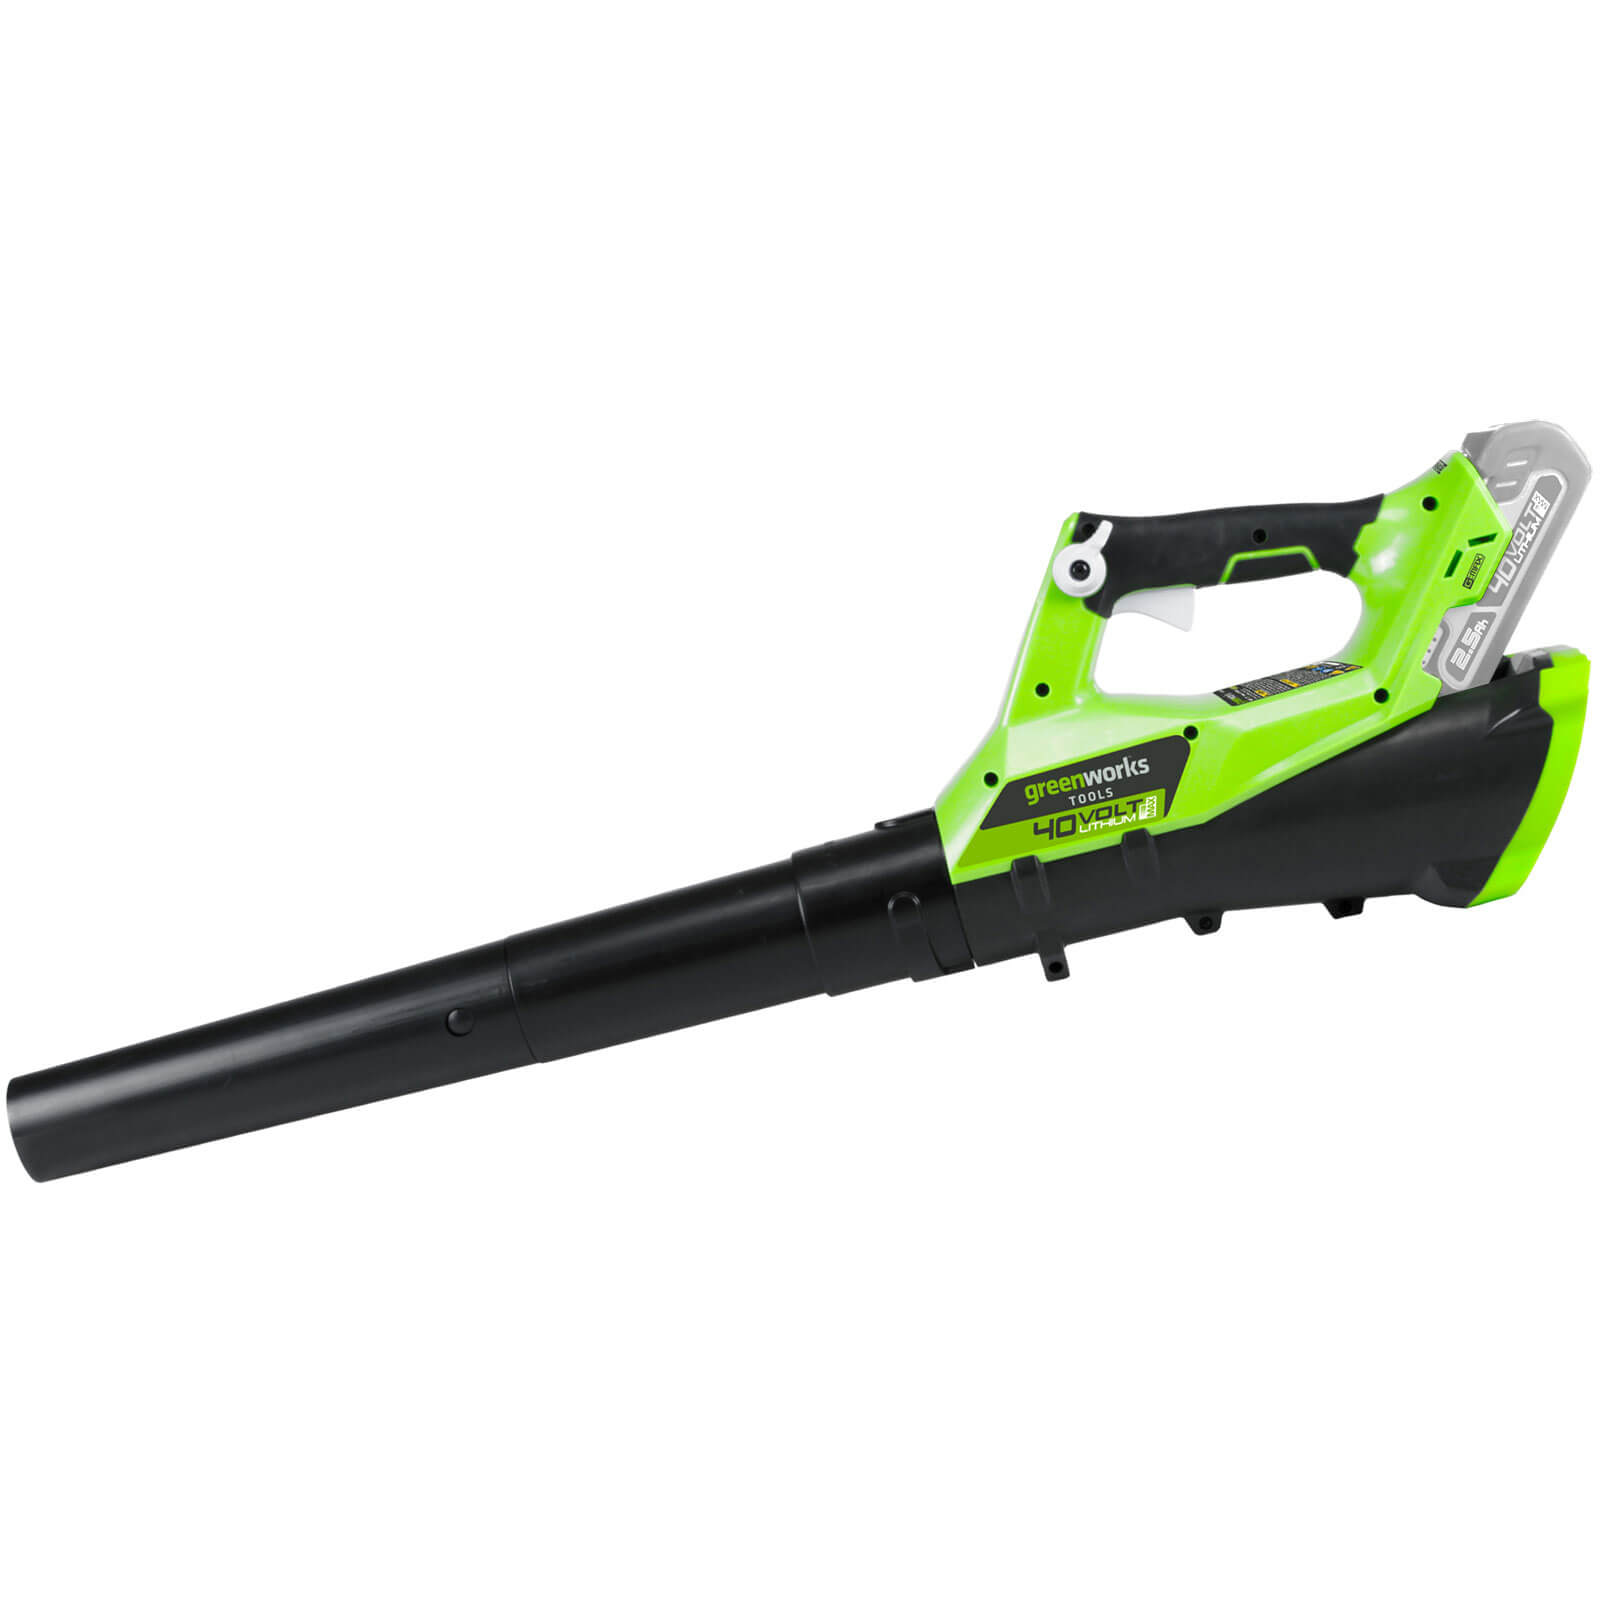 Image of Greenworks G40AB 40v Cordless Axial Garden Leaf Blower No Batteries No Charger